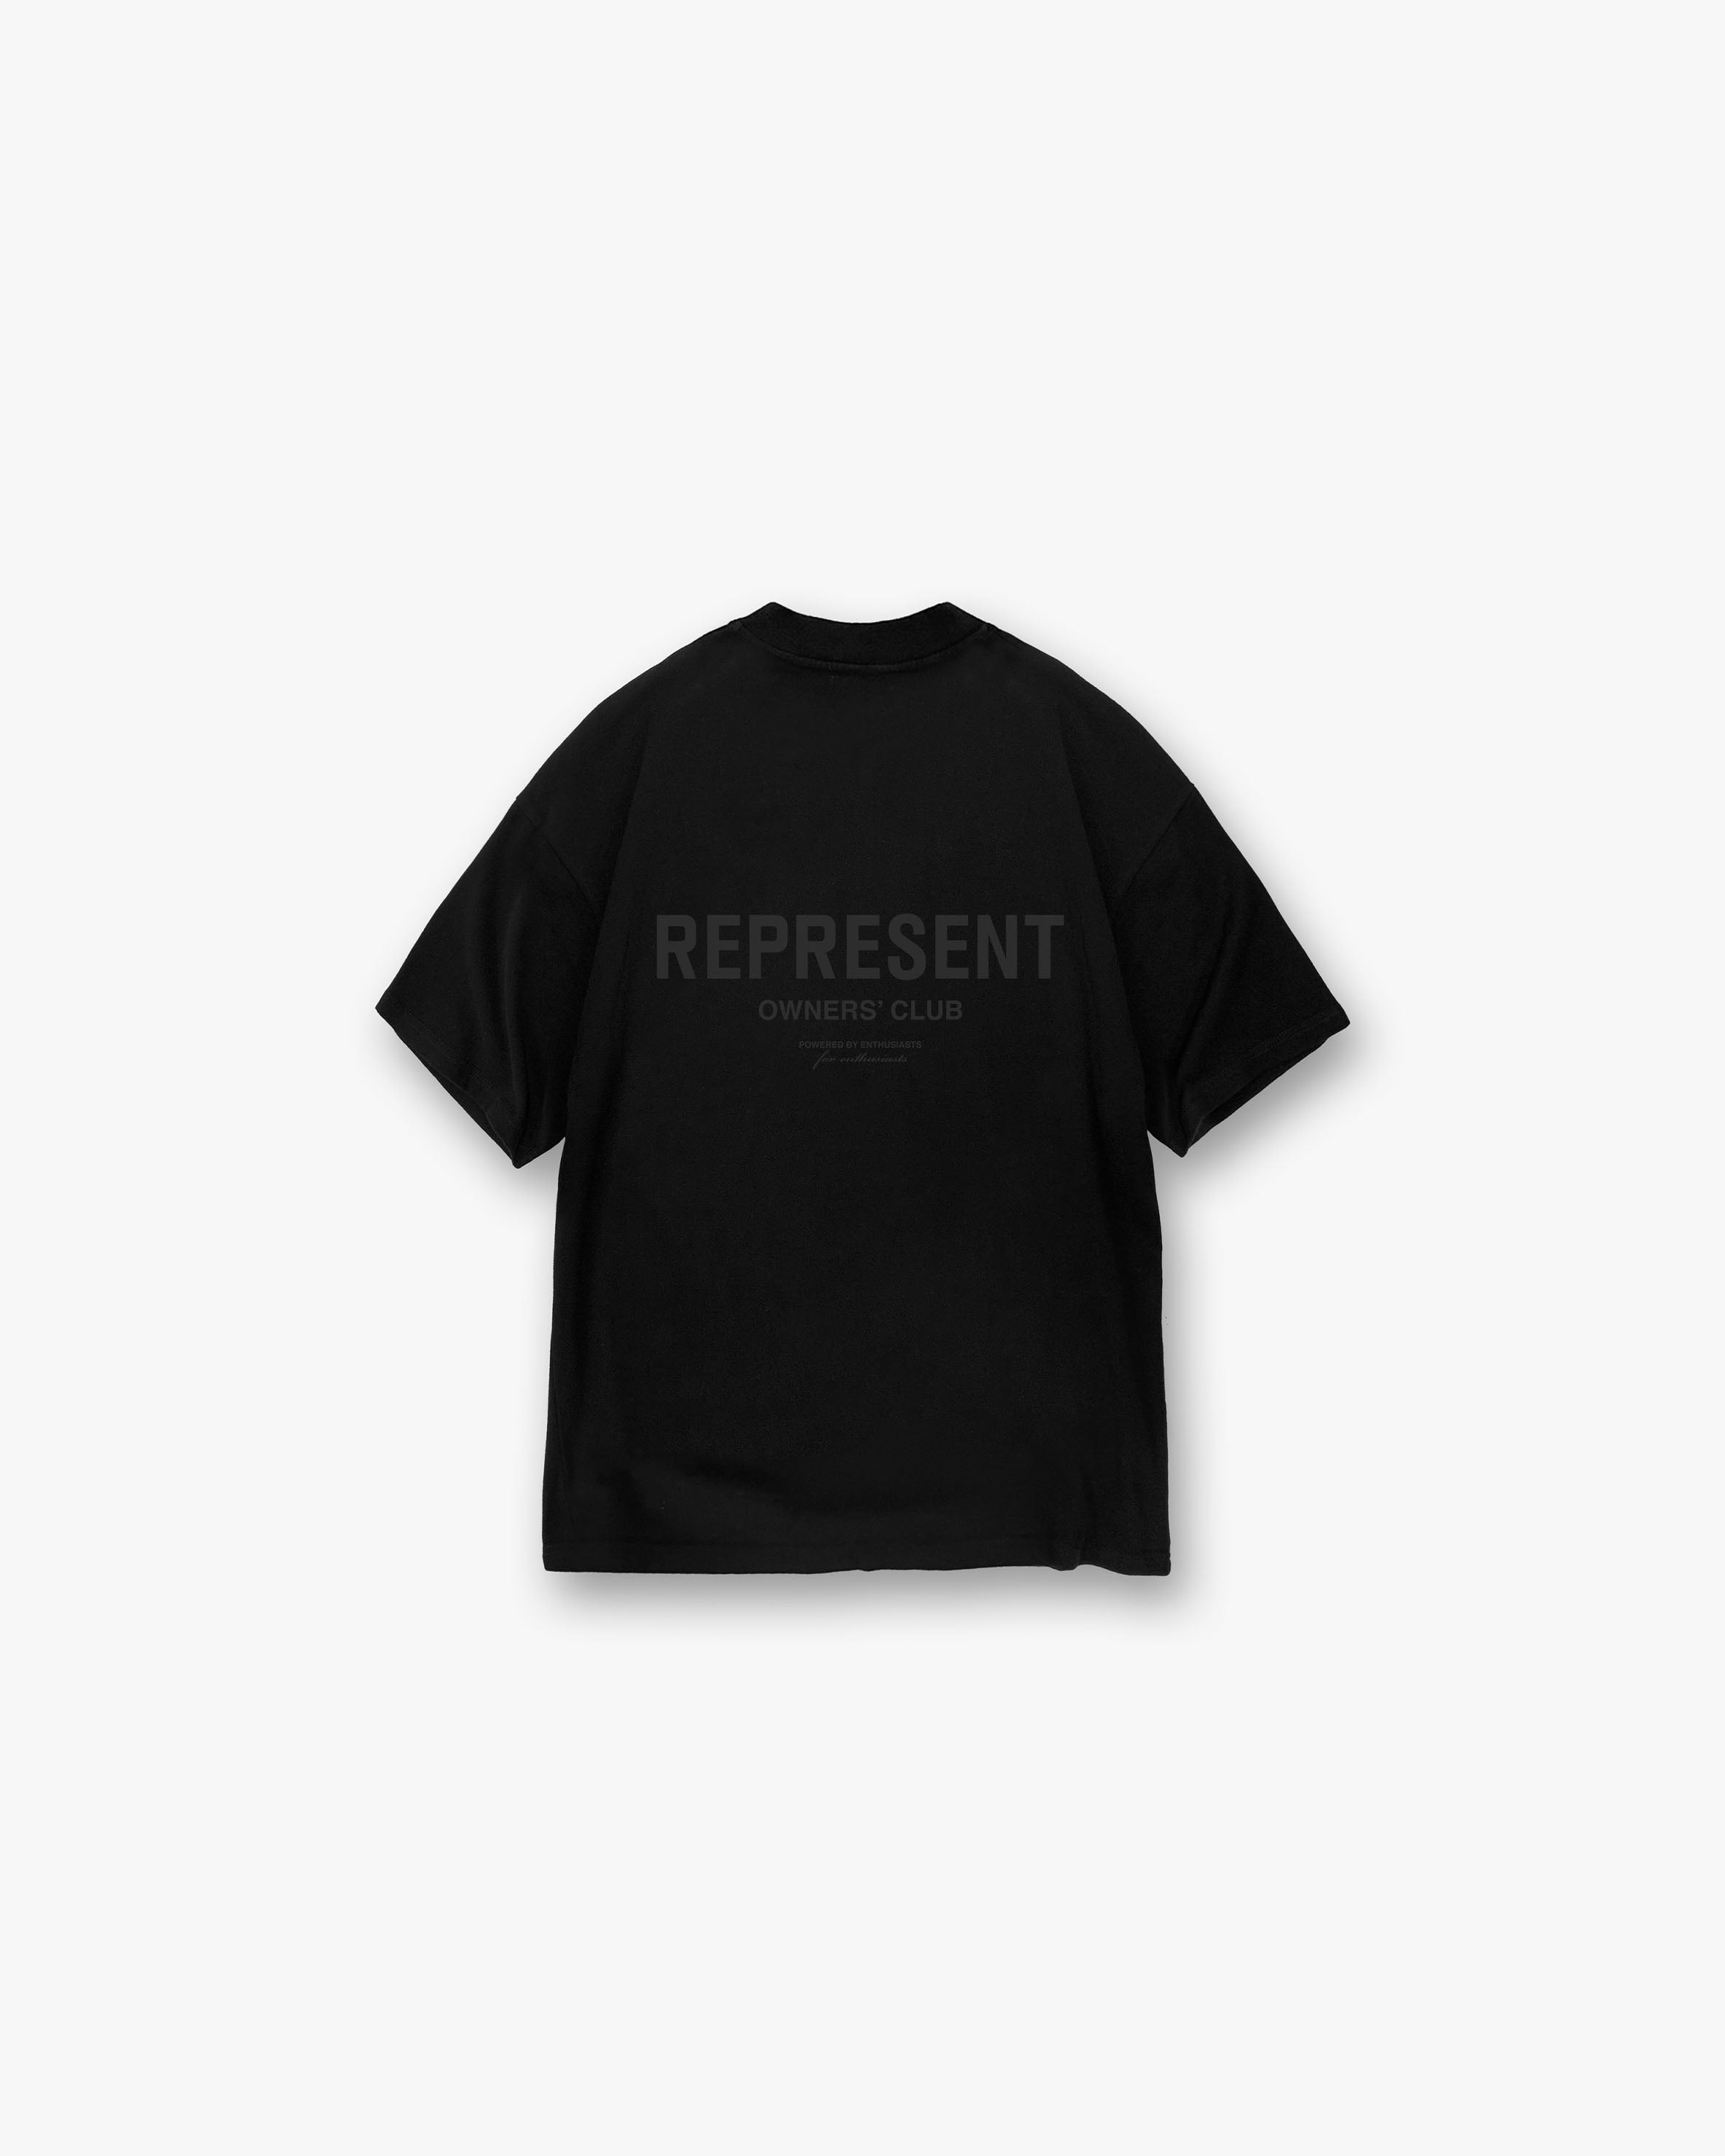 Represent Owners Club T-Shirt | Black Reflective T-Shirts Owners Club | Represent Clo